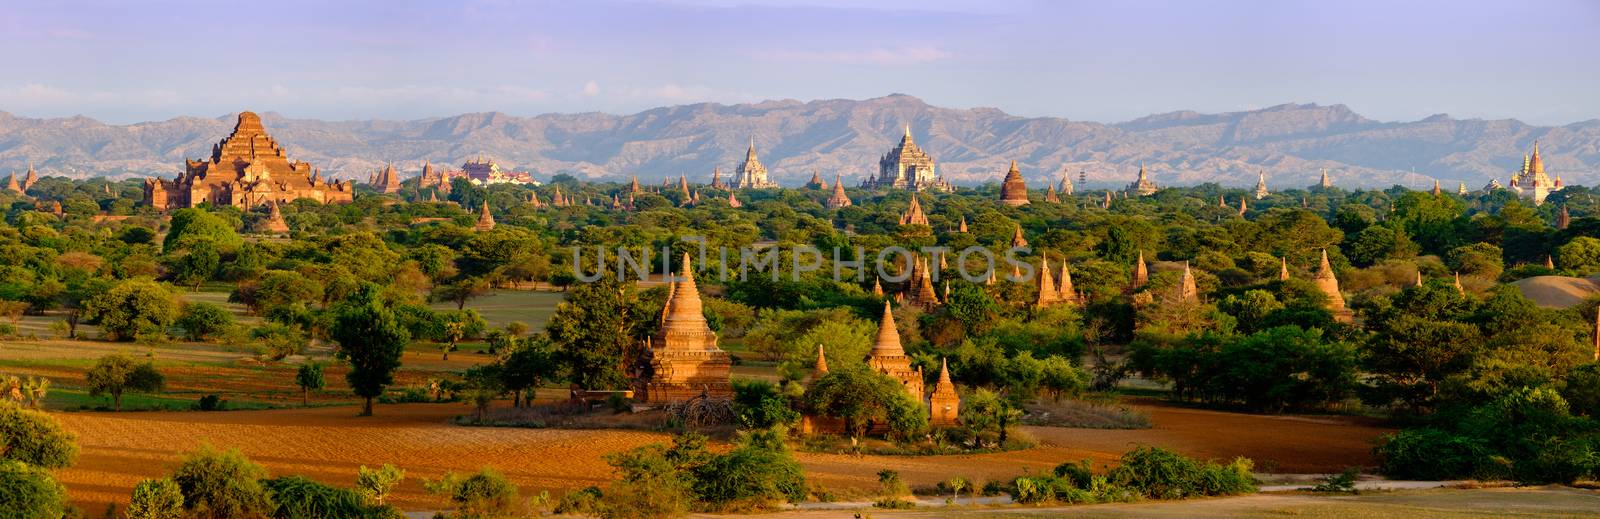 Panoramic landscape view of old temples in Bagan, Myanmar by martinm303